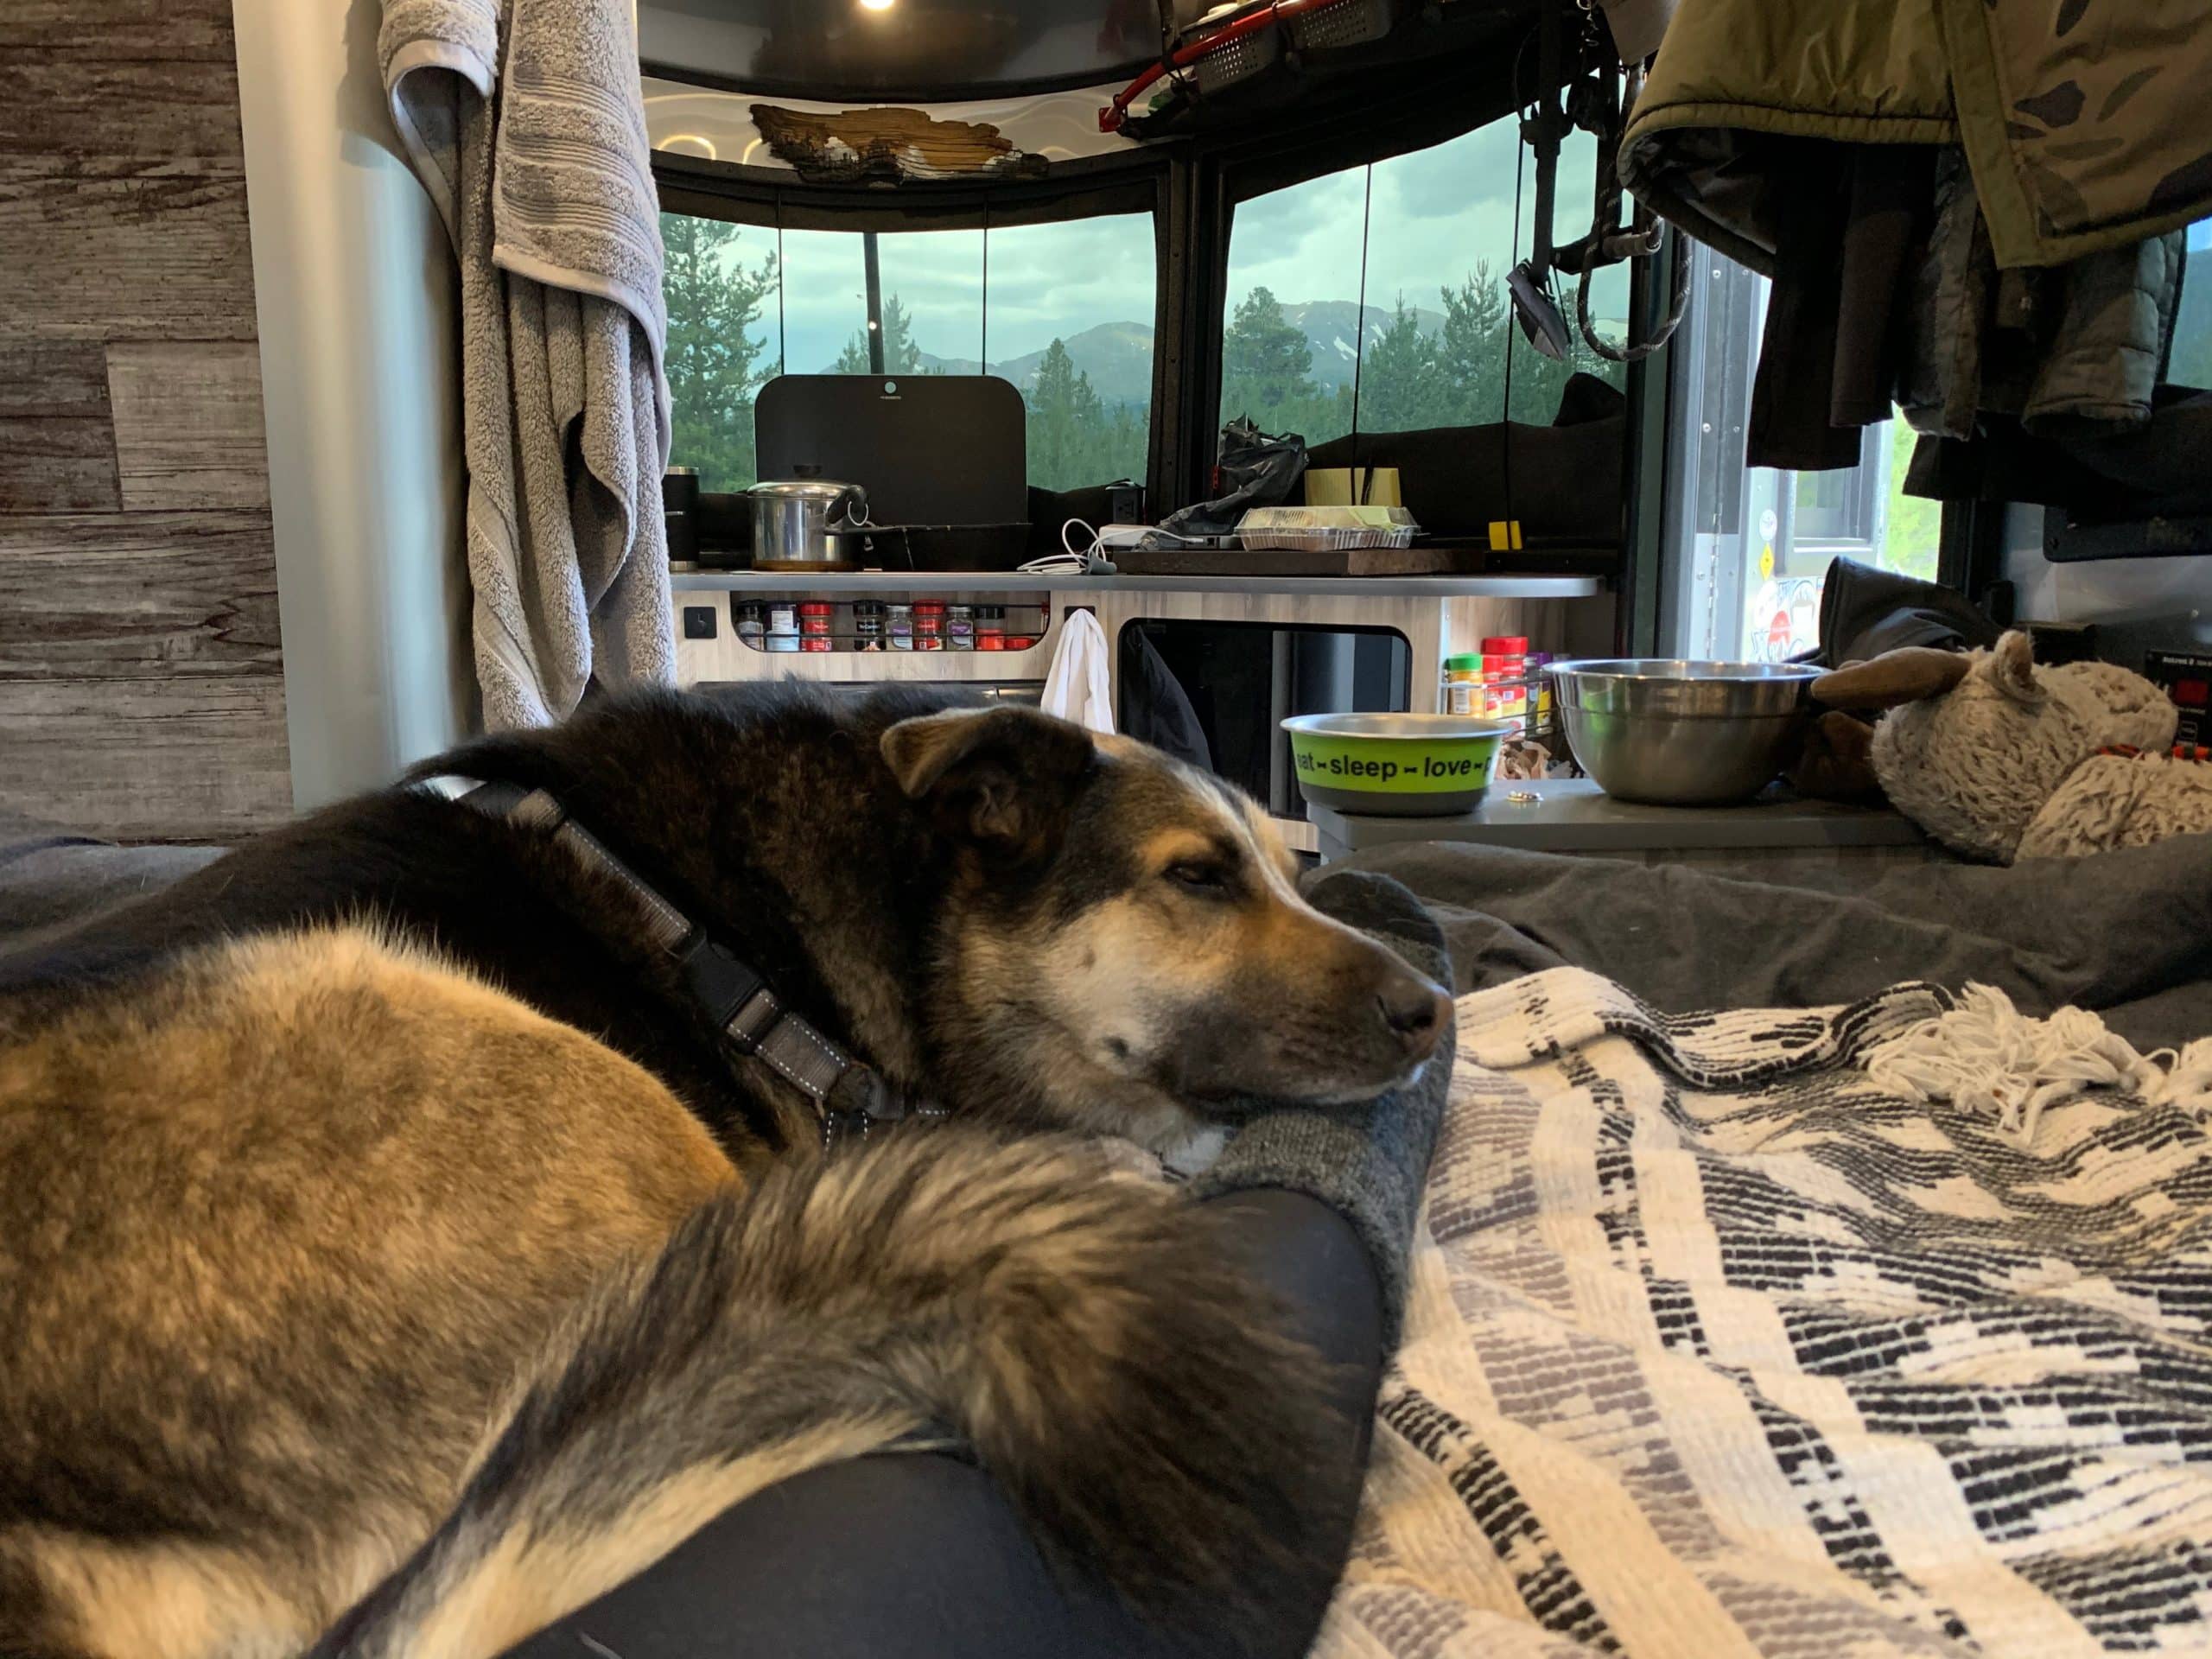 Interior of Tails of Wanderlust Airstream Basecamp with Cass and Jasper on the Bed